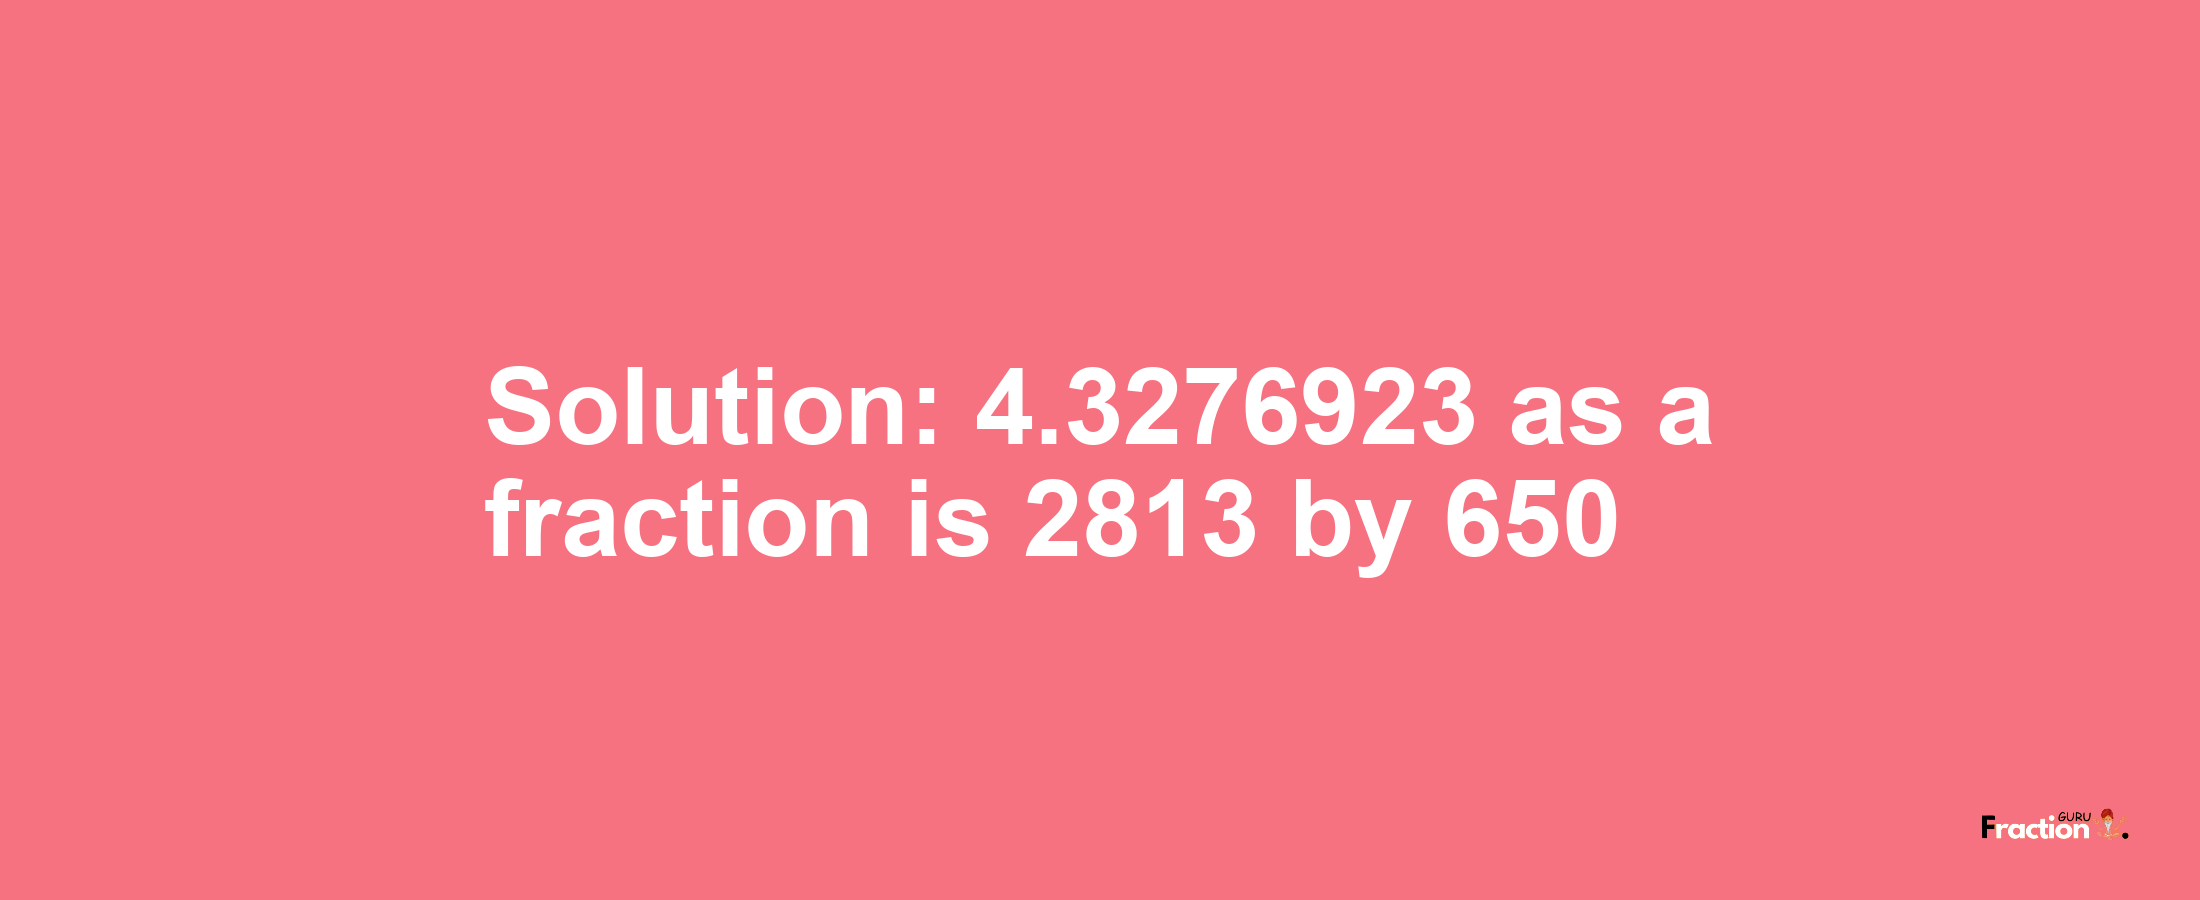 Solution:4.3276923 as a fraction is 2813/650